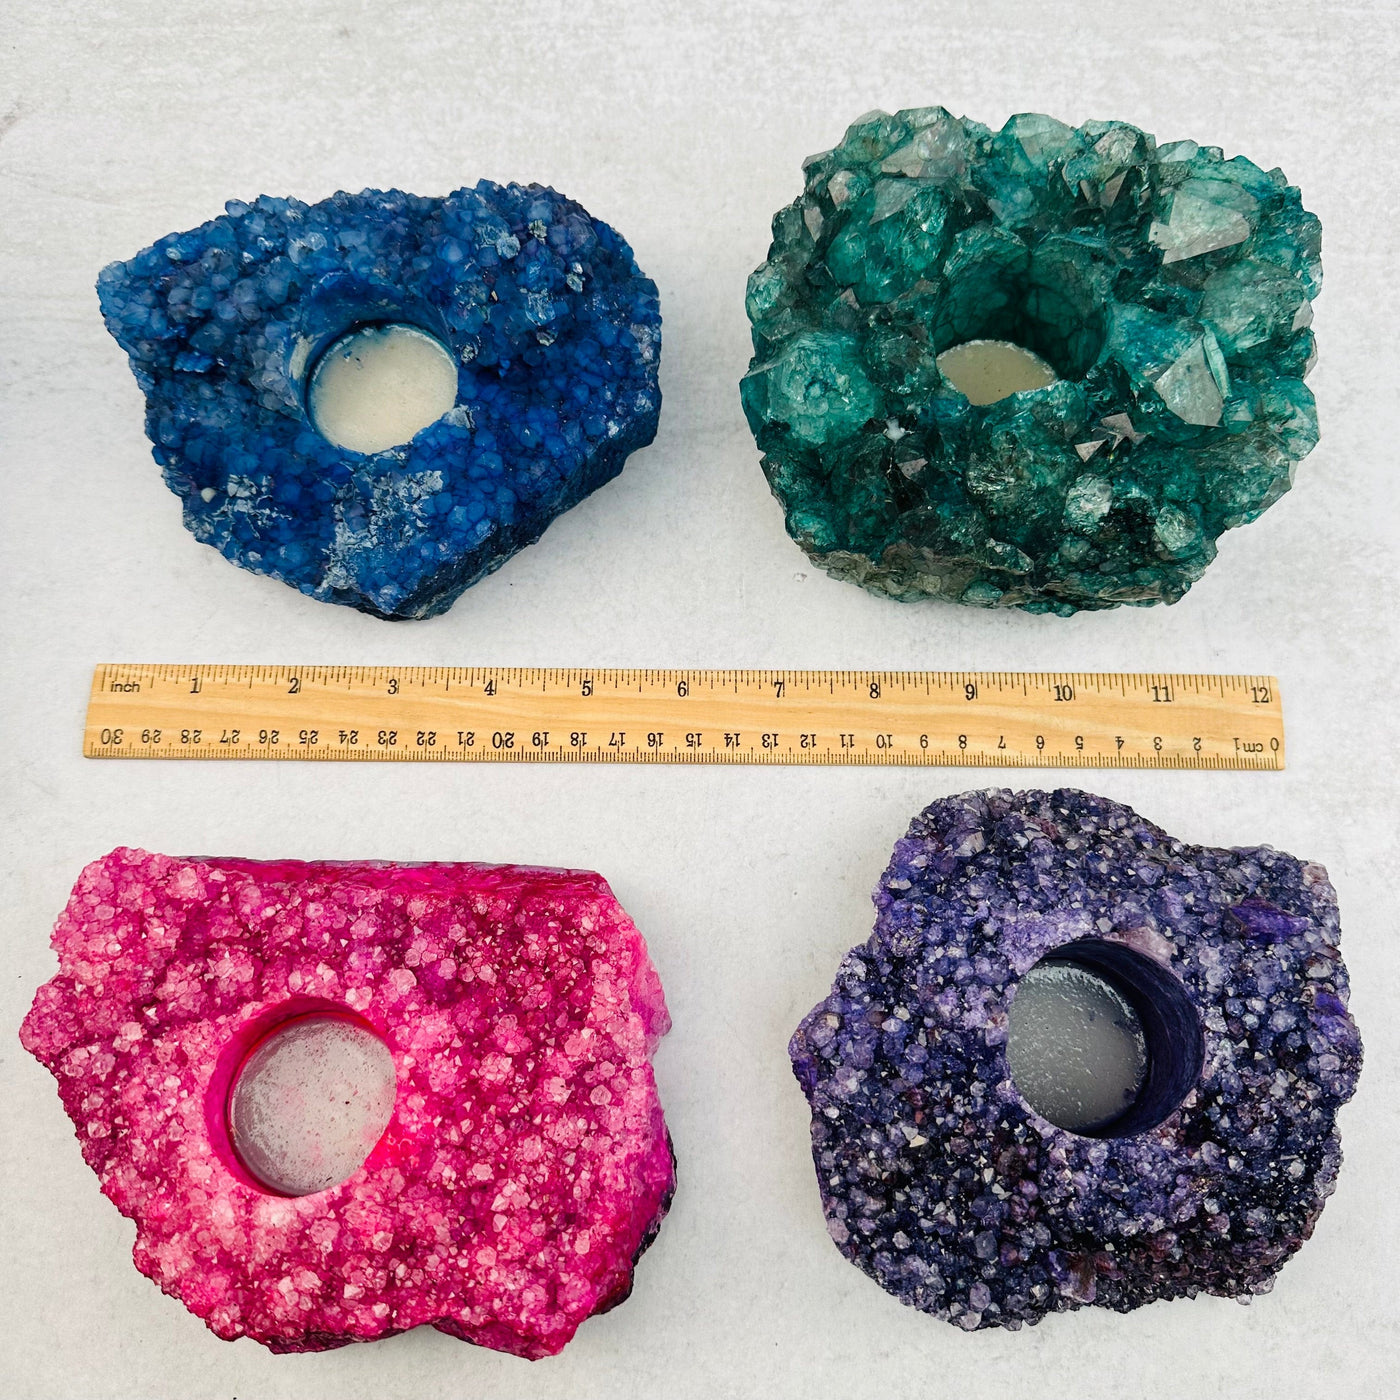 Crystal Cluster Candle Holder - Colorful Dyed Crystal Quartz - next to a ruler for size reference 